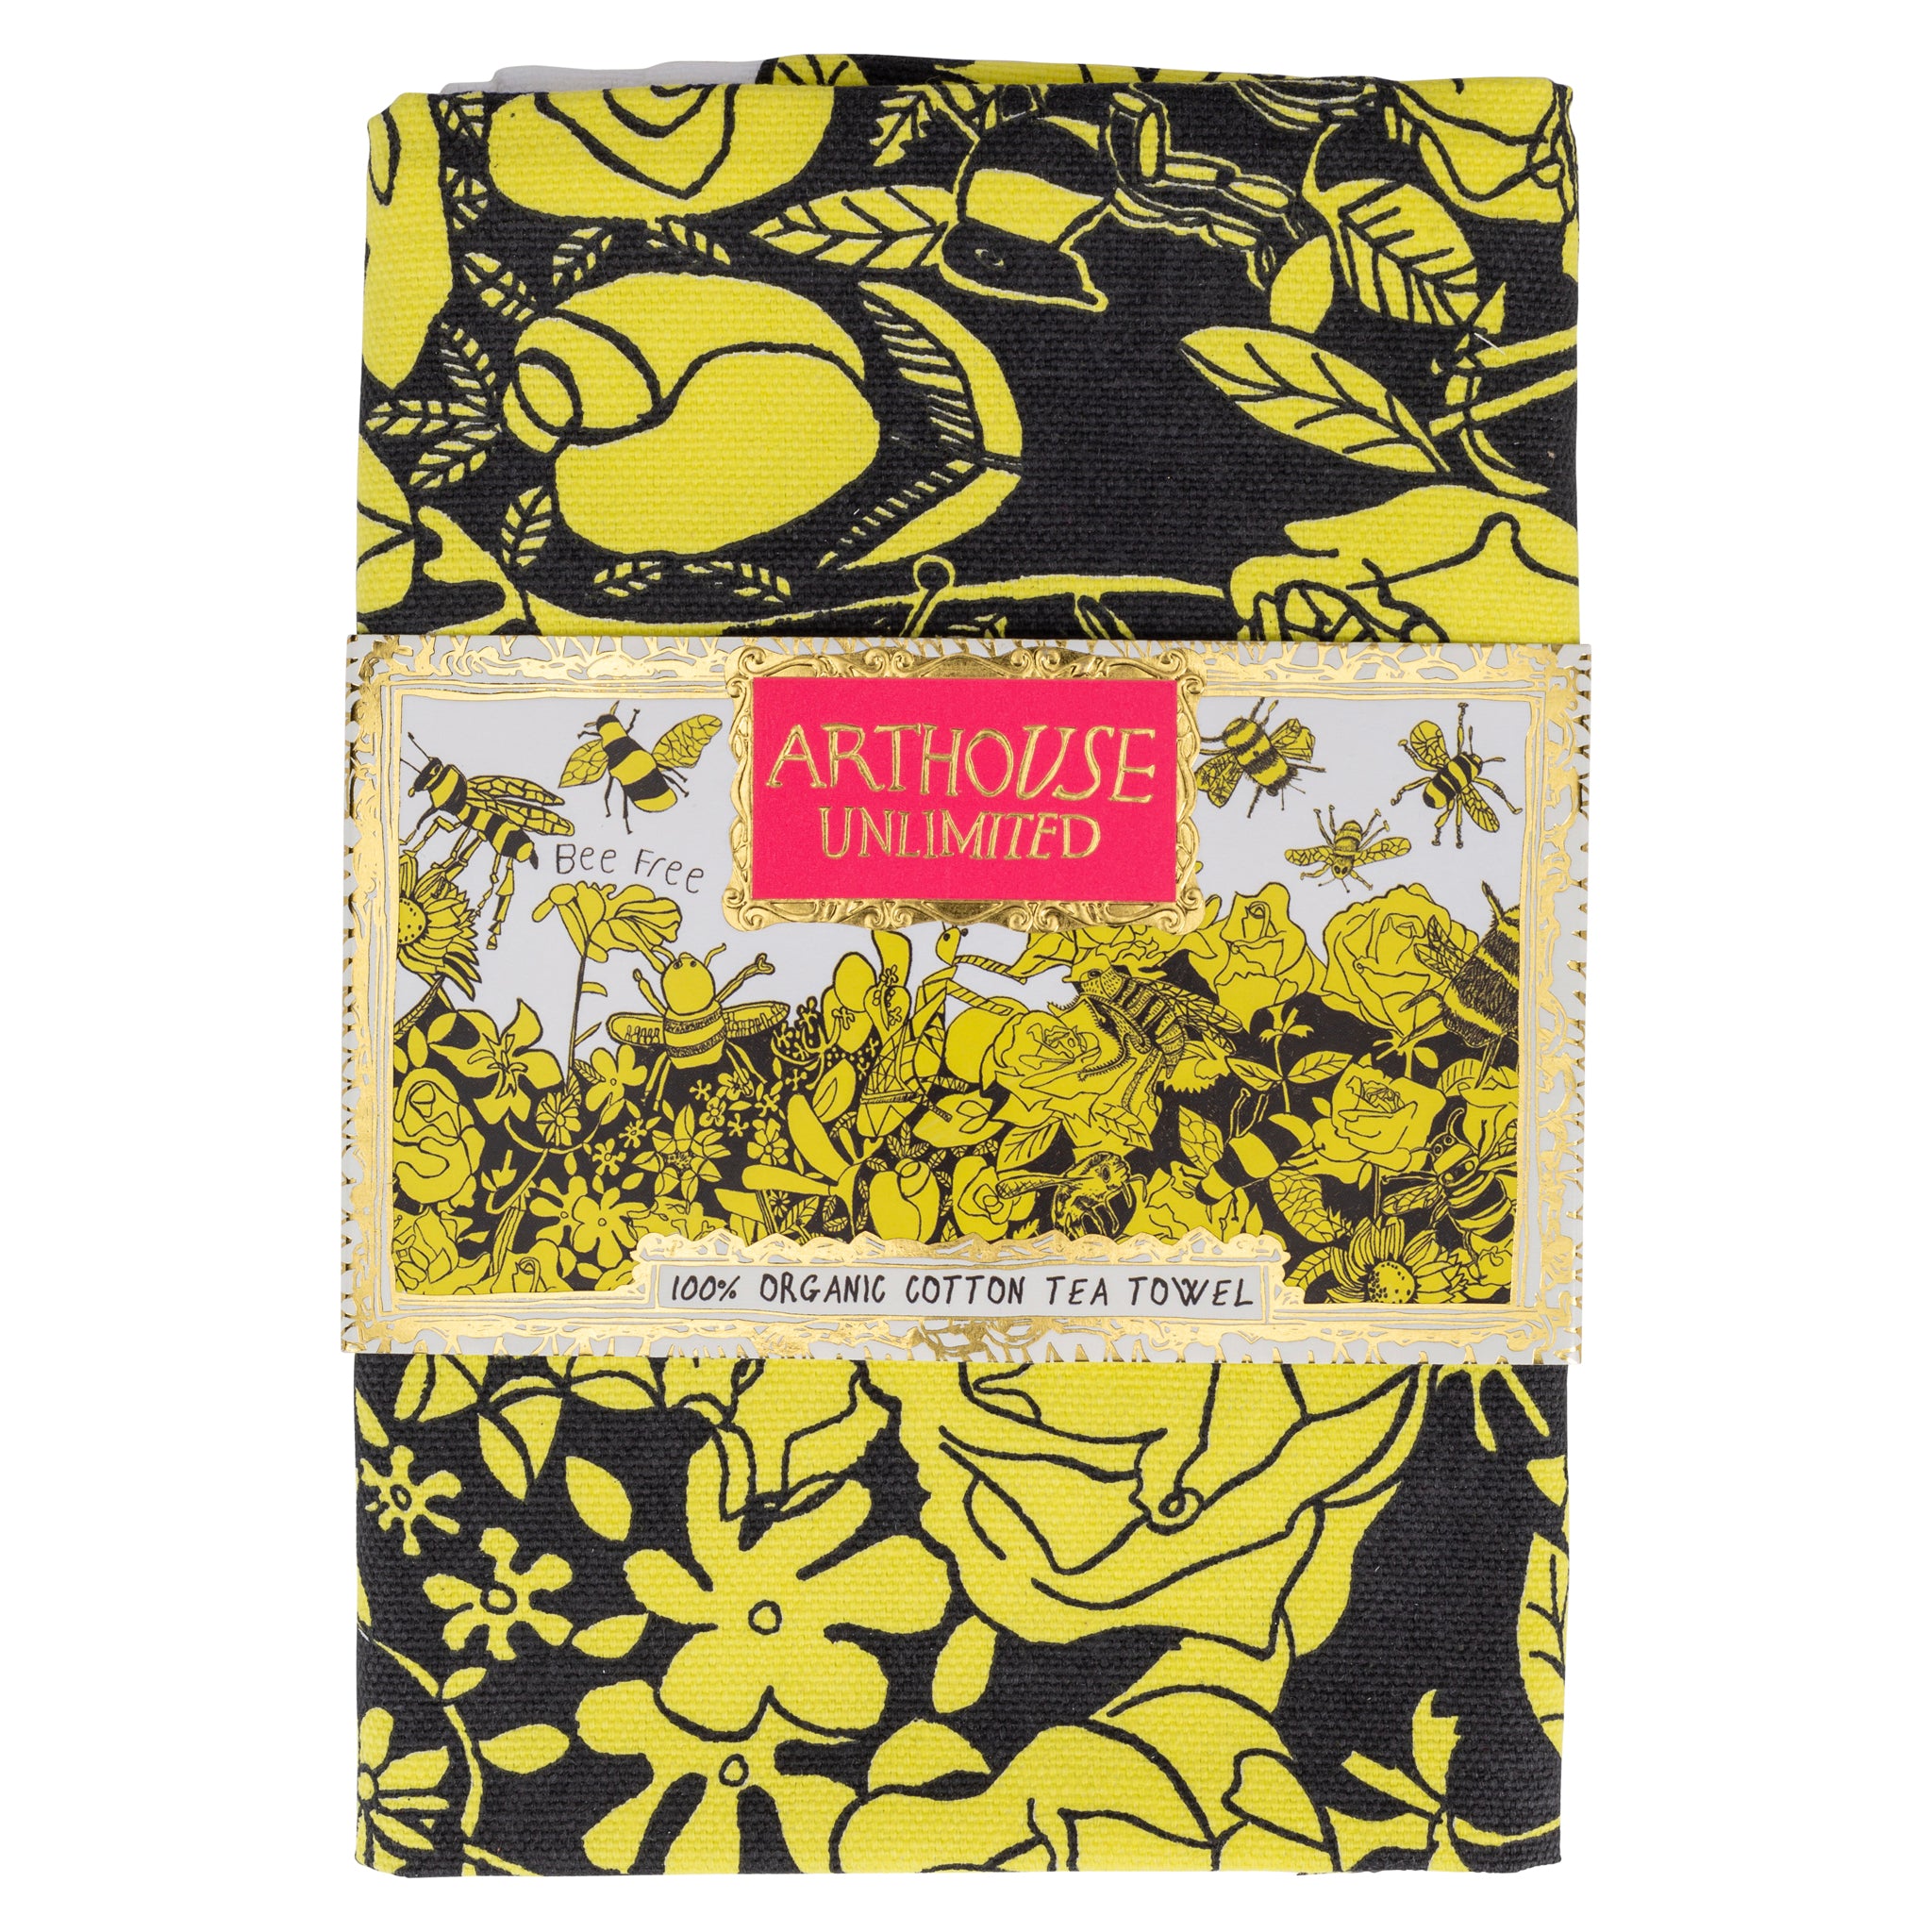 black and yellow Bee Free, 100% Organic Cotton Tea Towel with arthouse unlimited belly band 